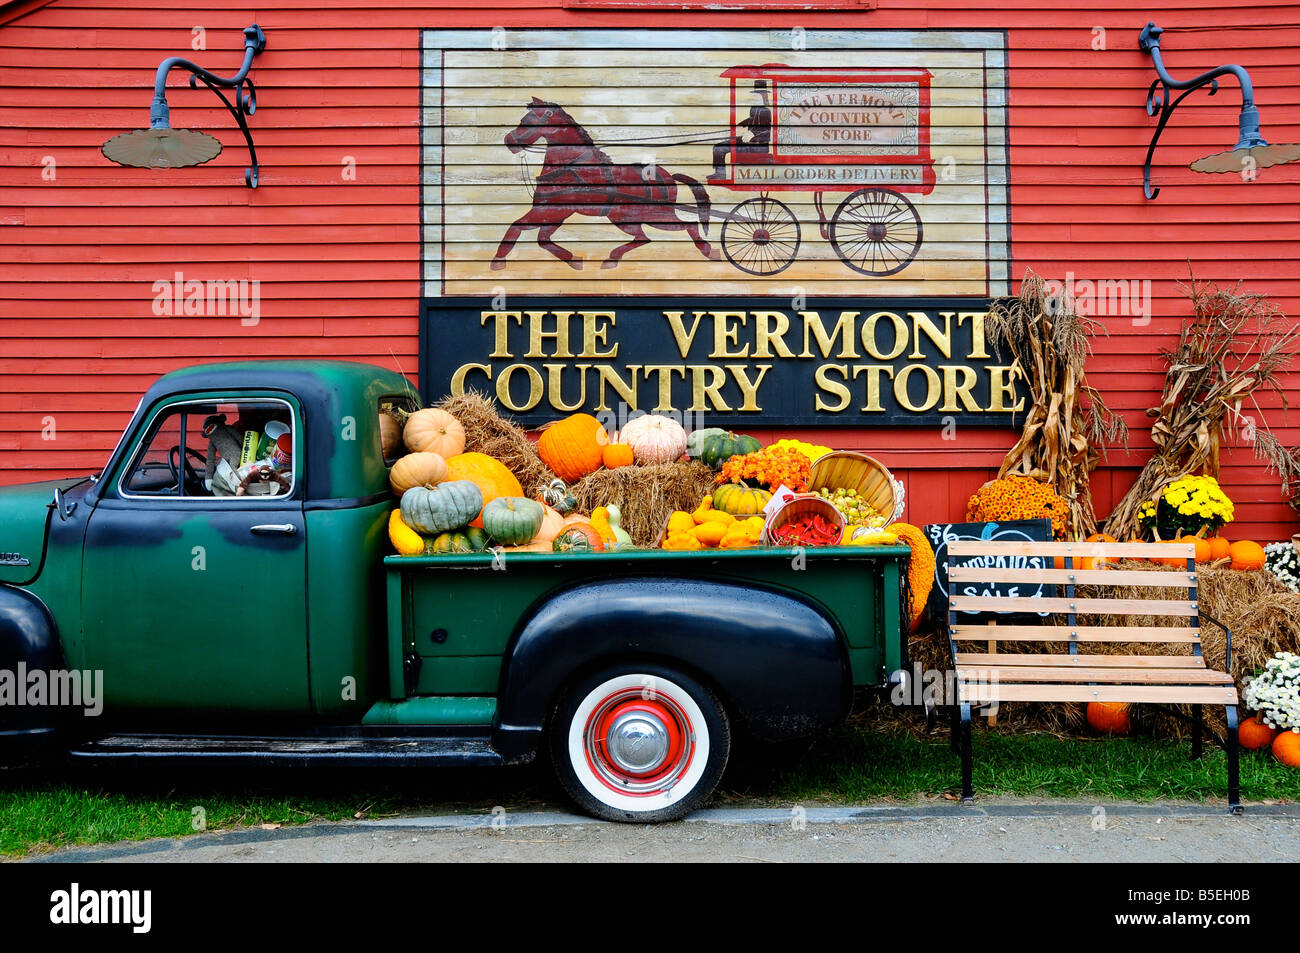 THE VERMONT COUNTRY STORE WESTON, VERMONT An old fashioned country store  with old time cand…